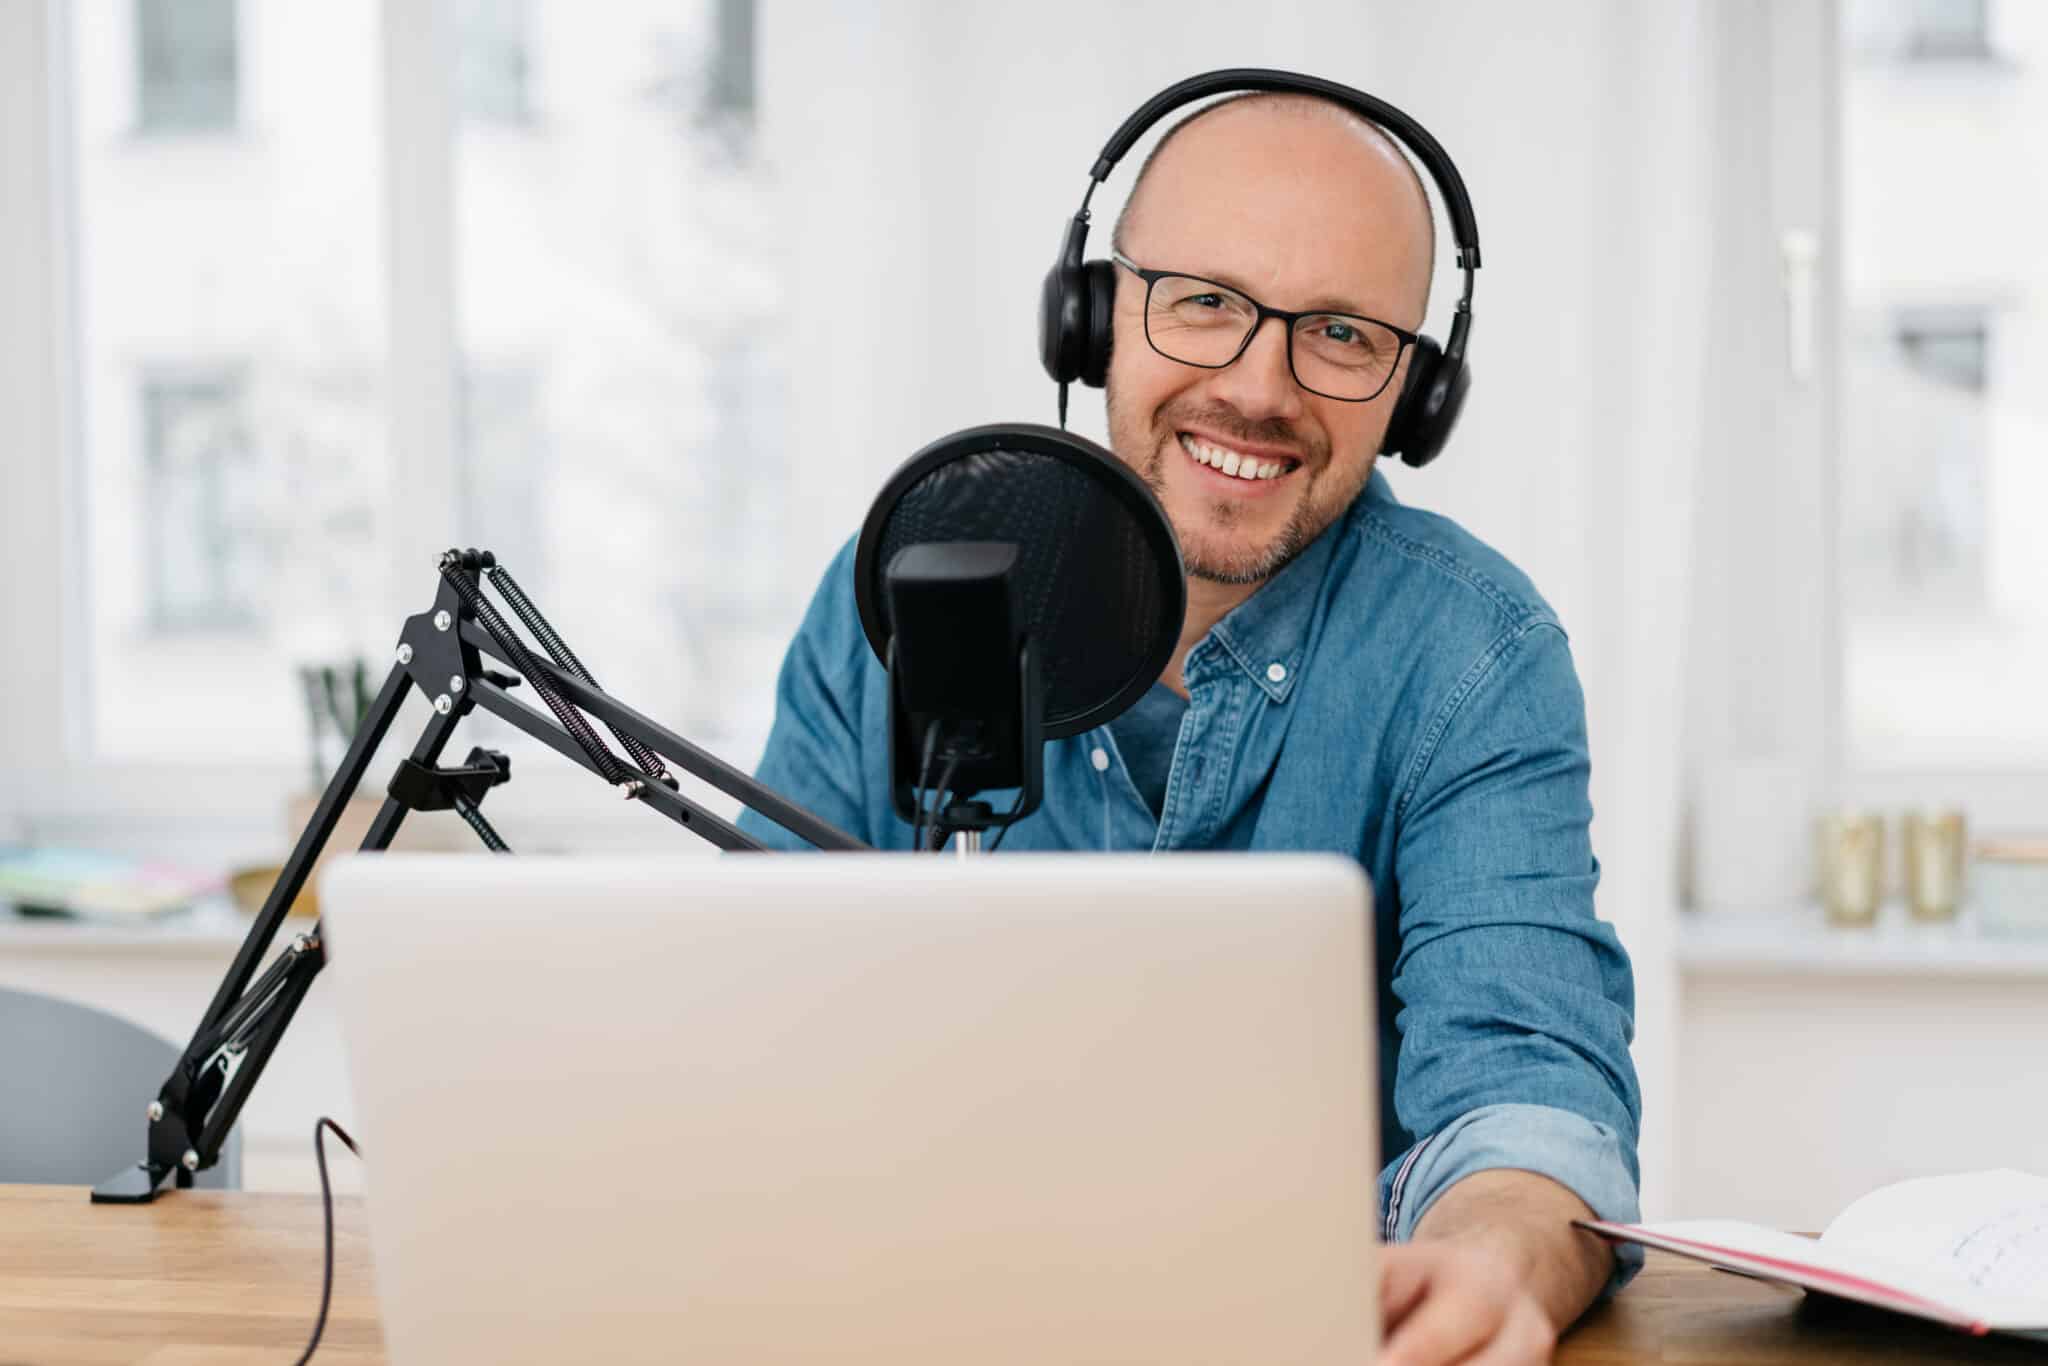 Male podcaster is visibly pleased with Athreon's professional services for his podcast transcripts.